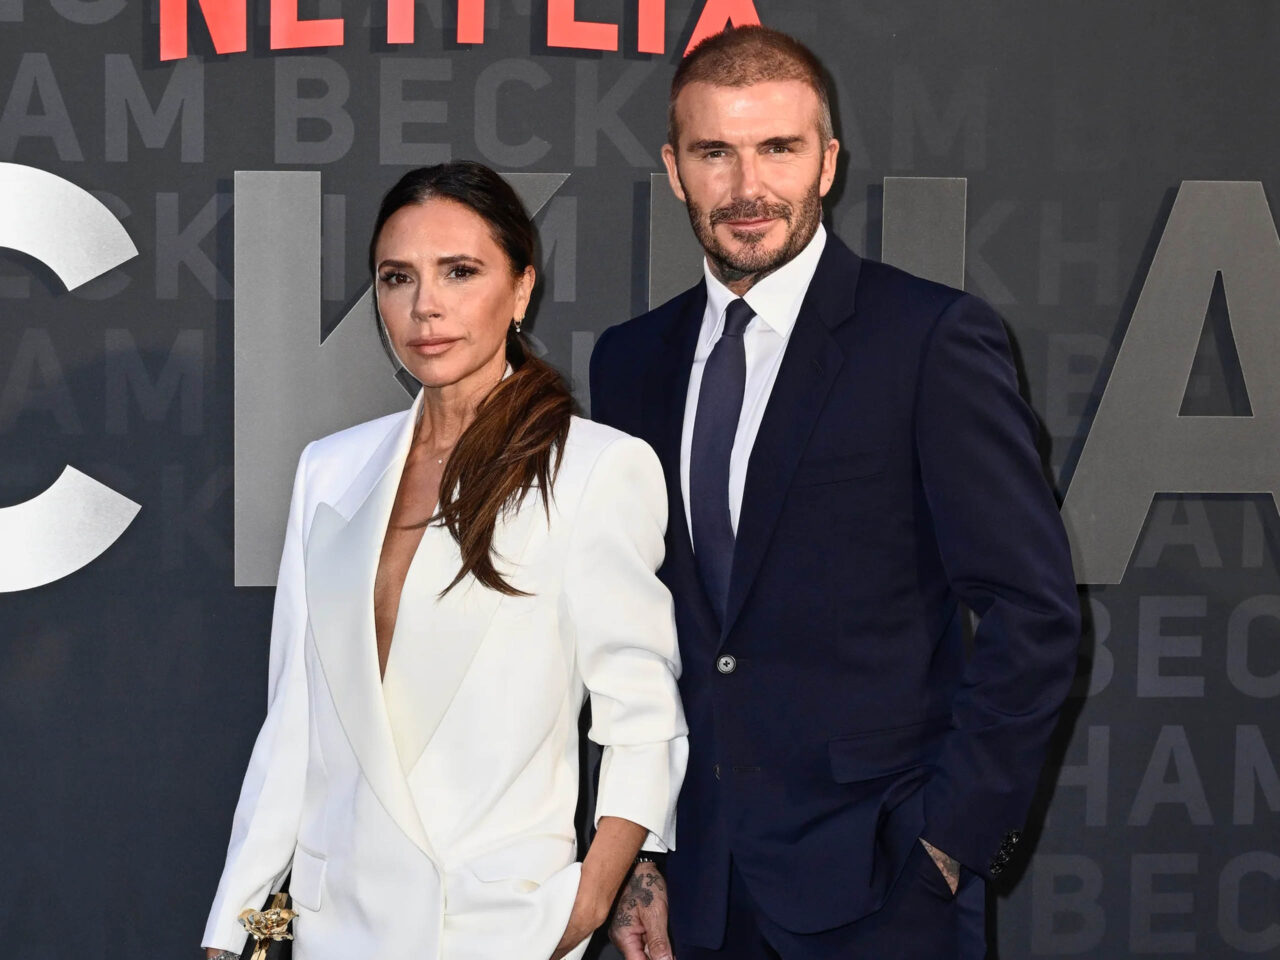 Victoria and David Beckham Nail His-and-Hers Suits